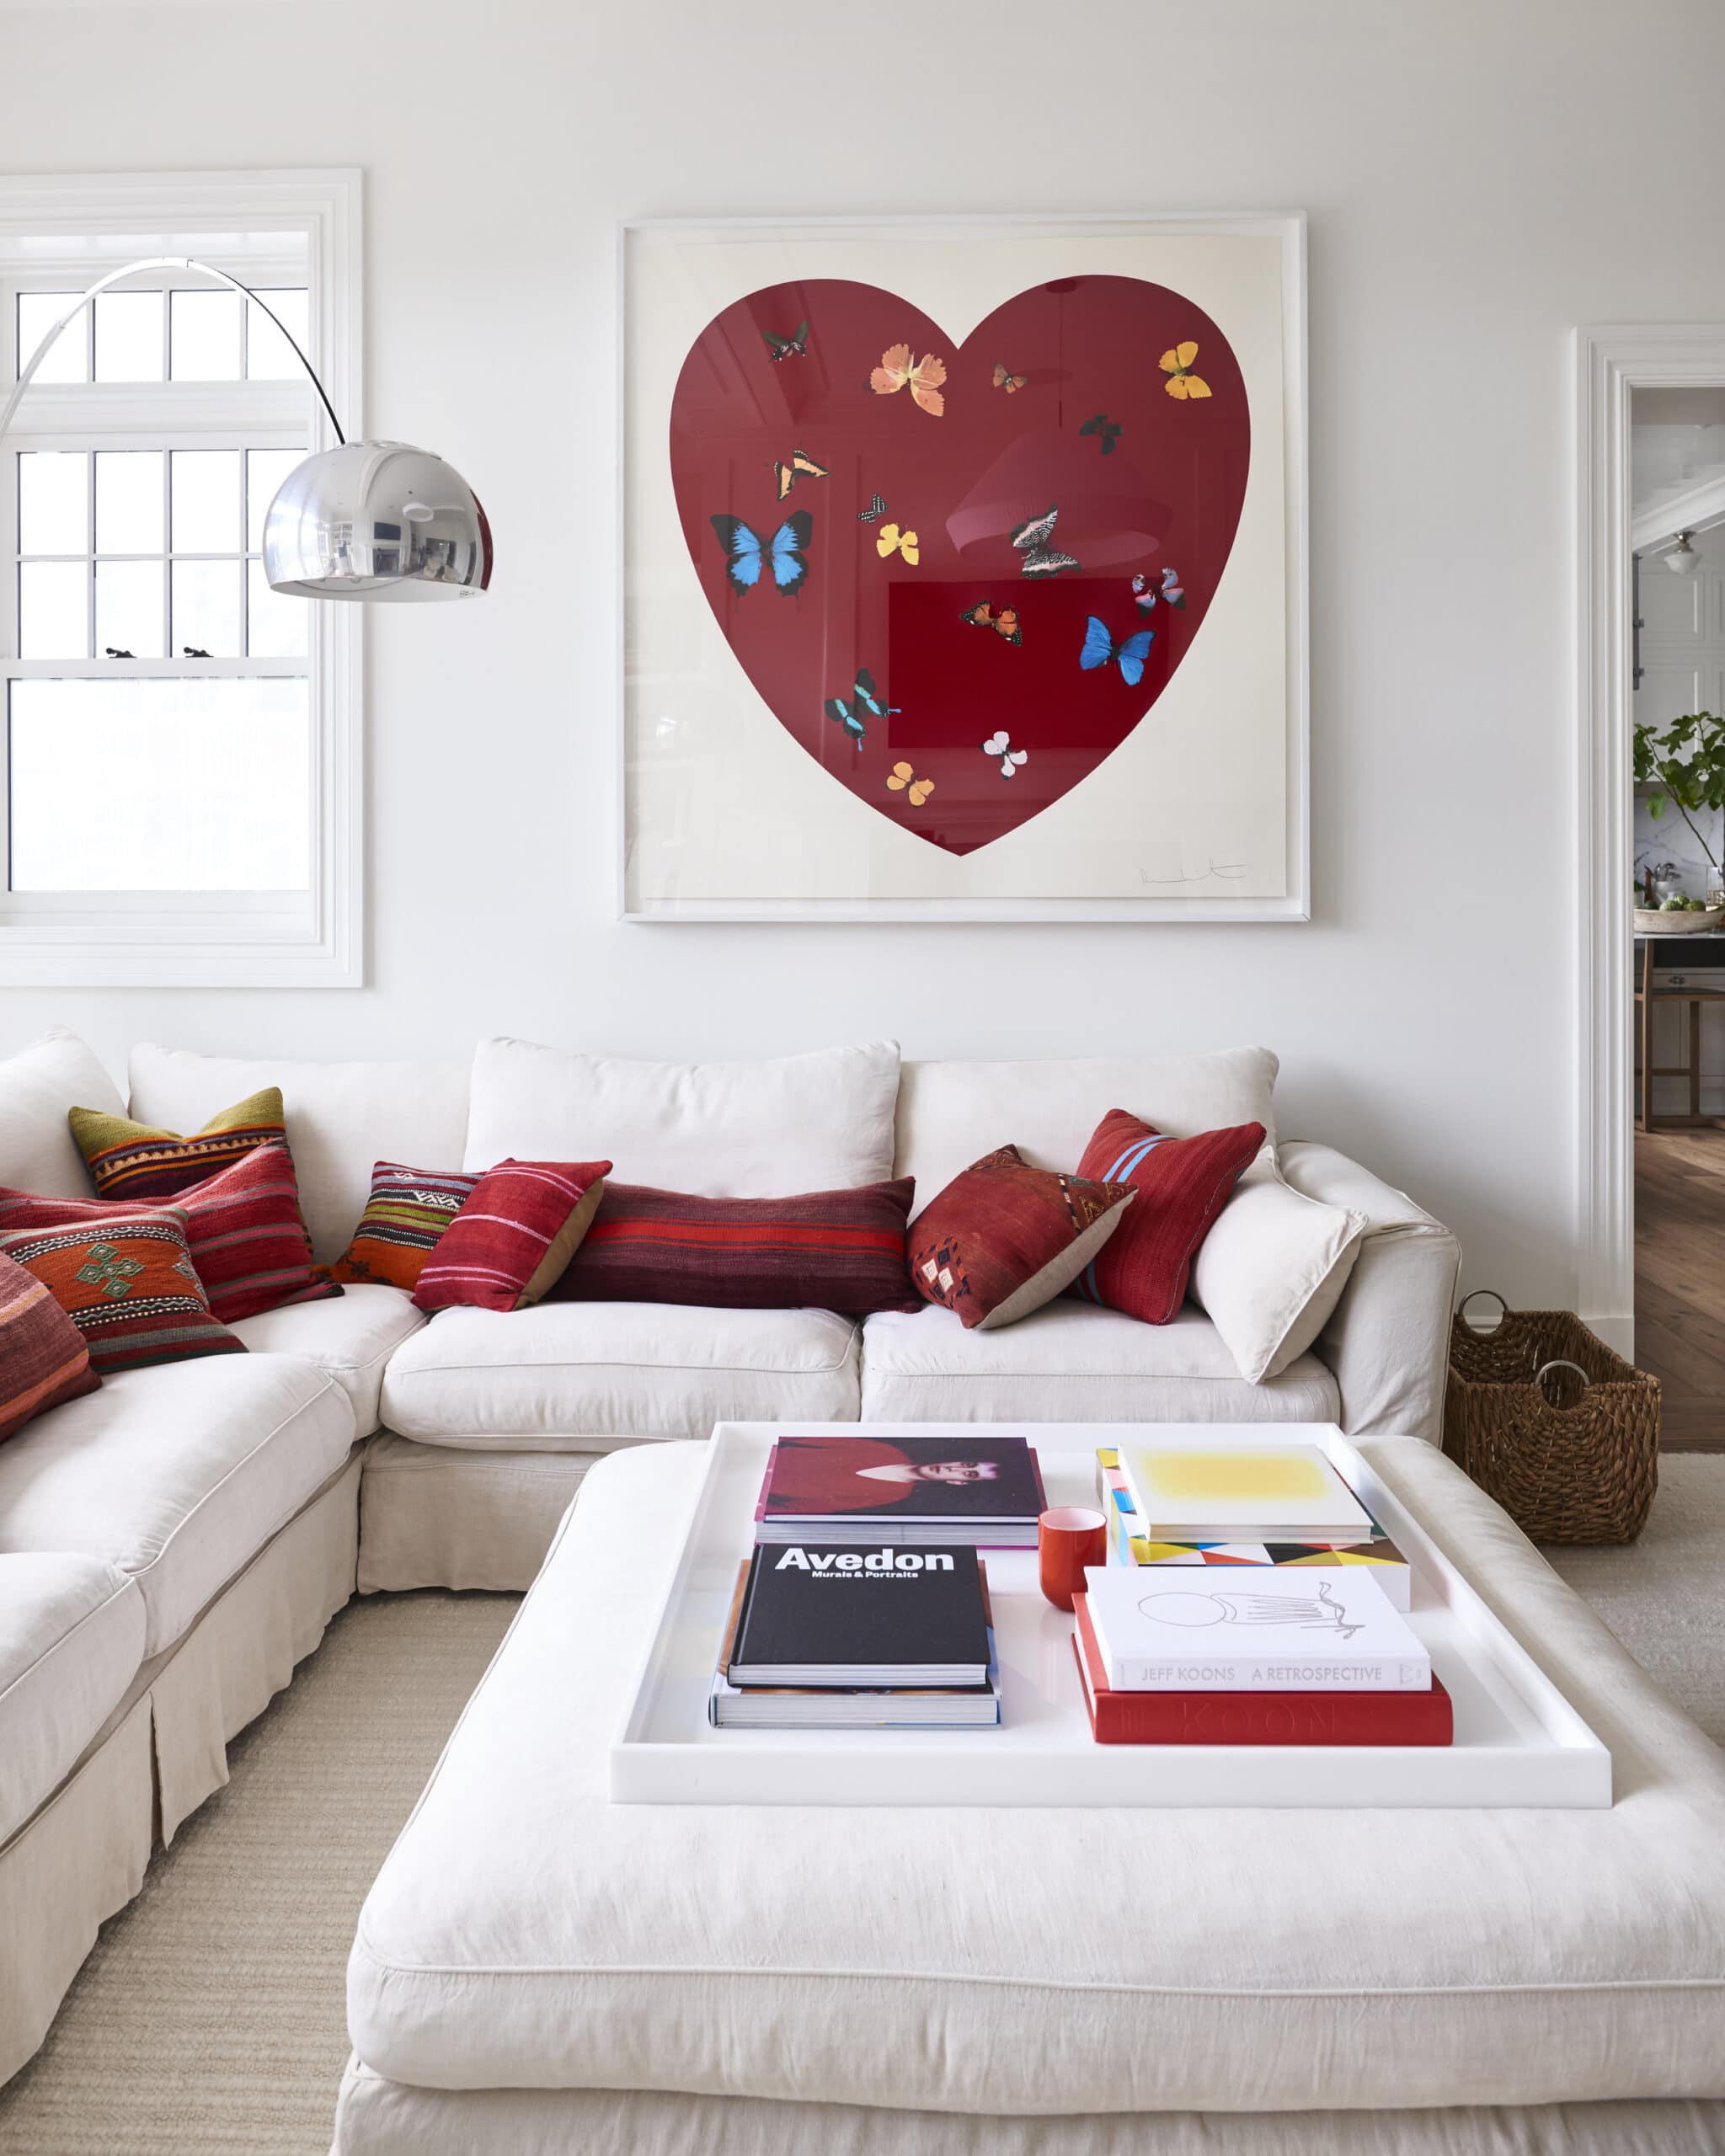 heart art in a red and white living room | coco kelley